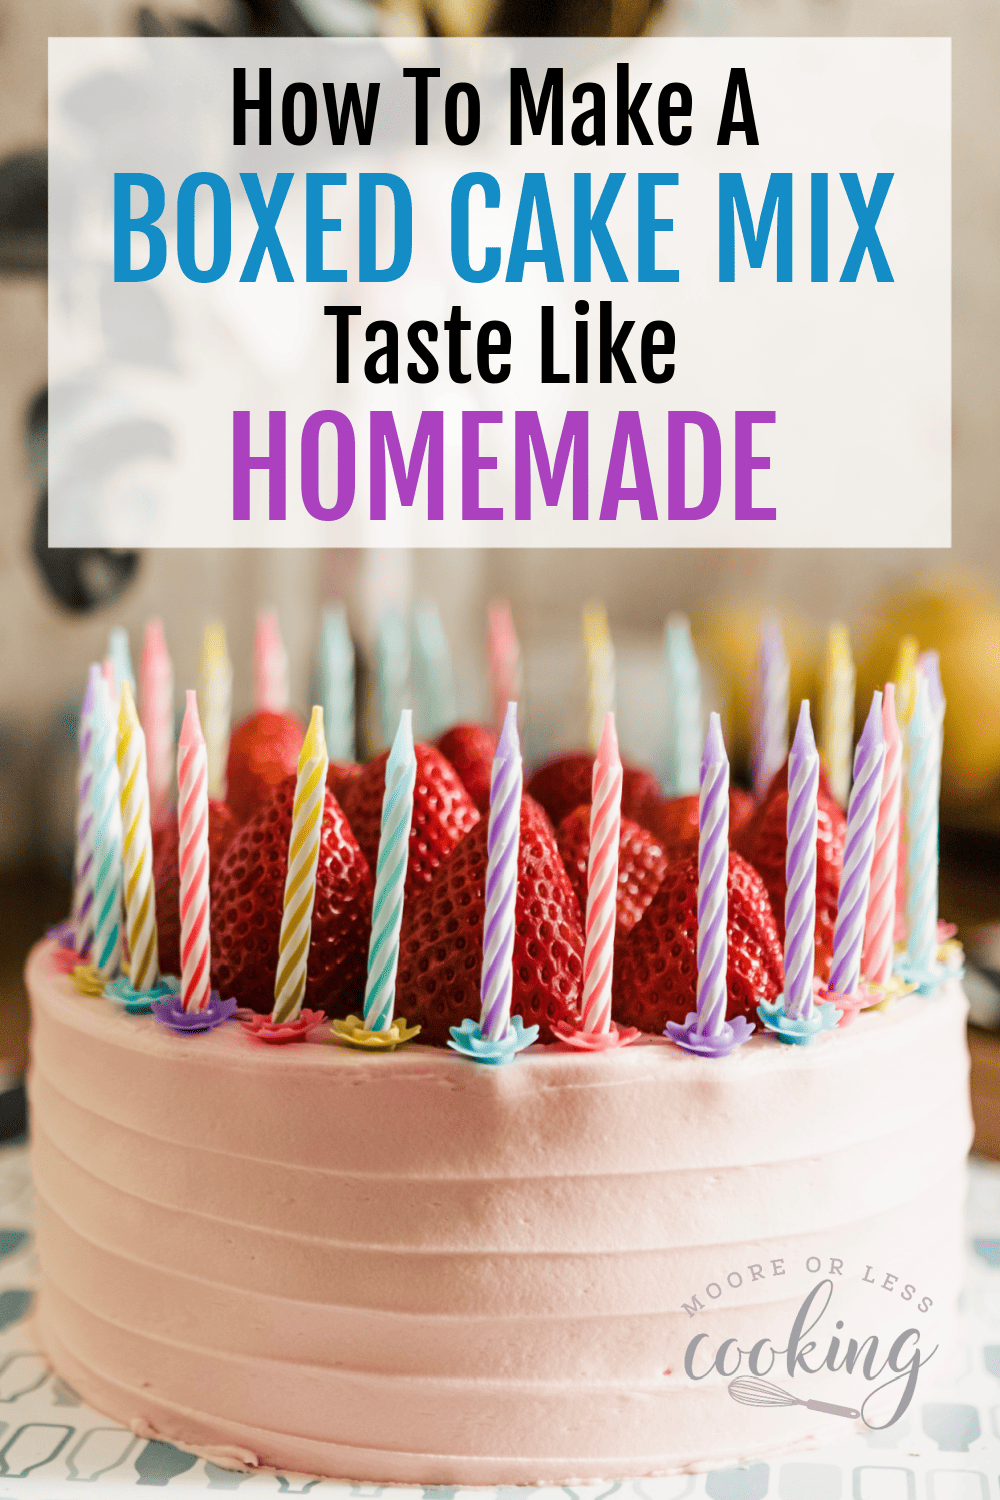 I love to make a cake from scratch, but sometimes it just isn’t practical. When time is short, ingredients are missing, or I need to get something in the oven quickly, a boxed cake mix can save the day. Through the years, I’ve learned a few ways to upgrade a boxed mix that will make it taste a little more homemade and give it a little something extra. via @Mooreorlesscook